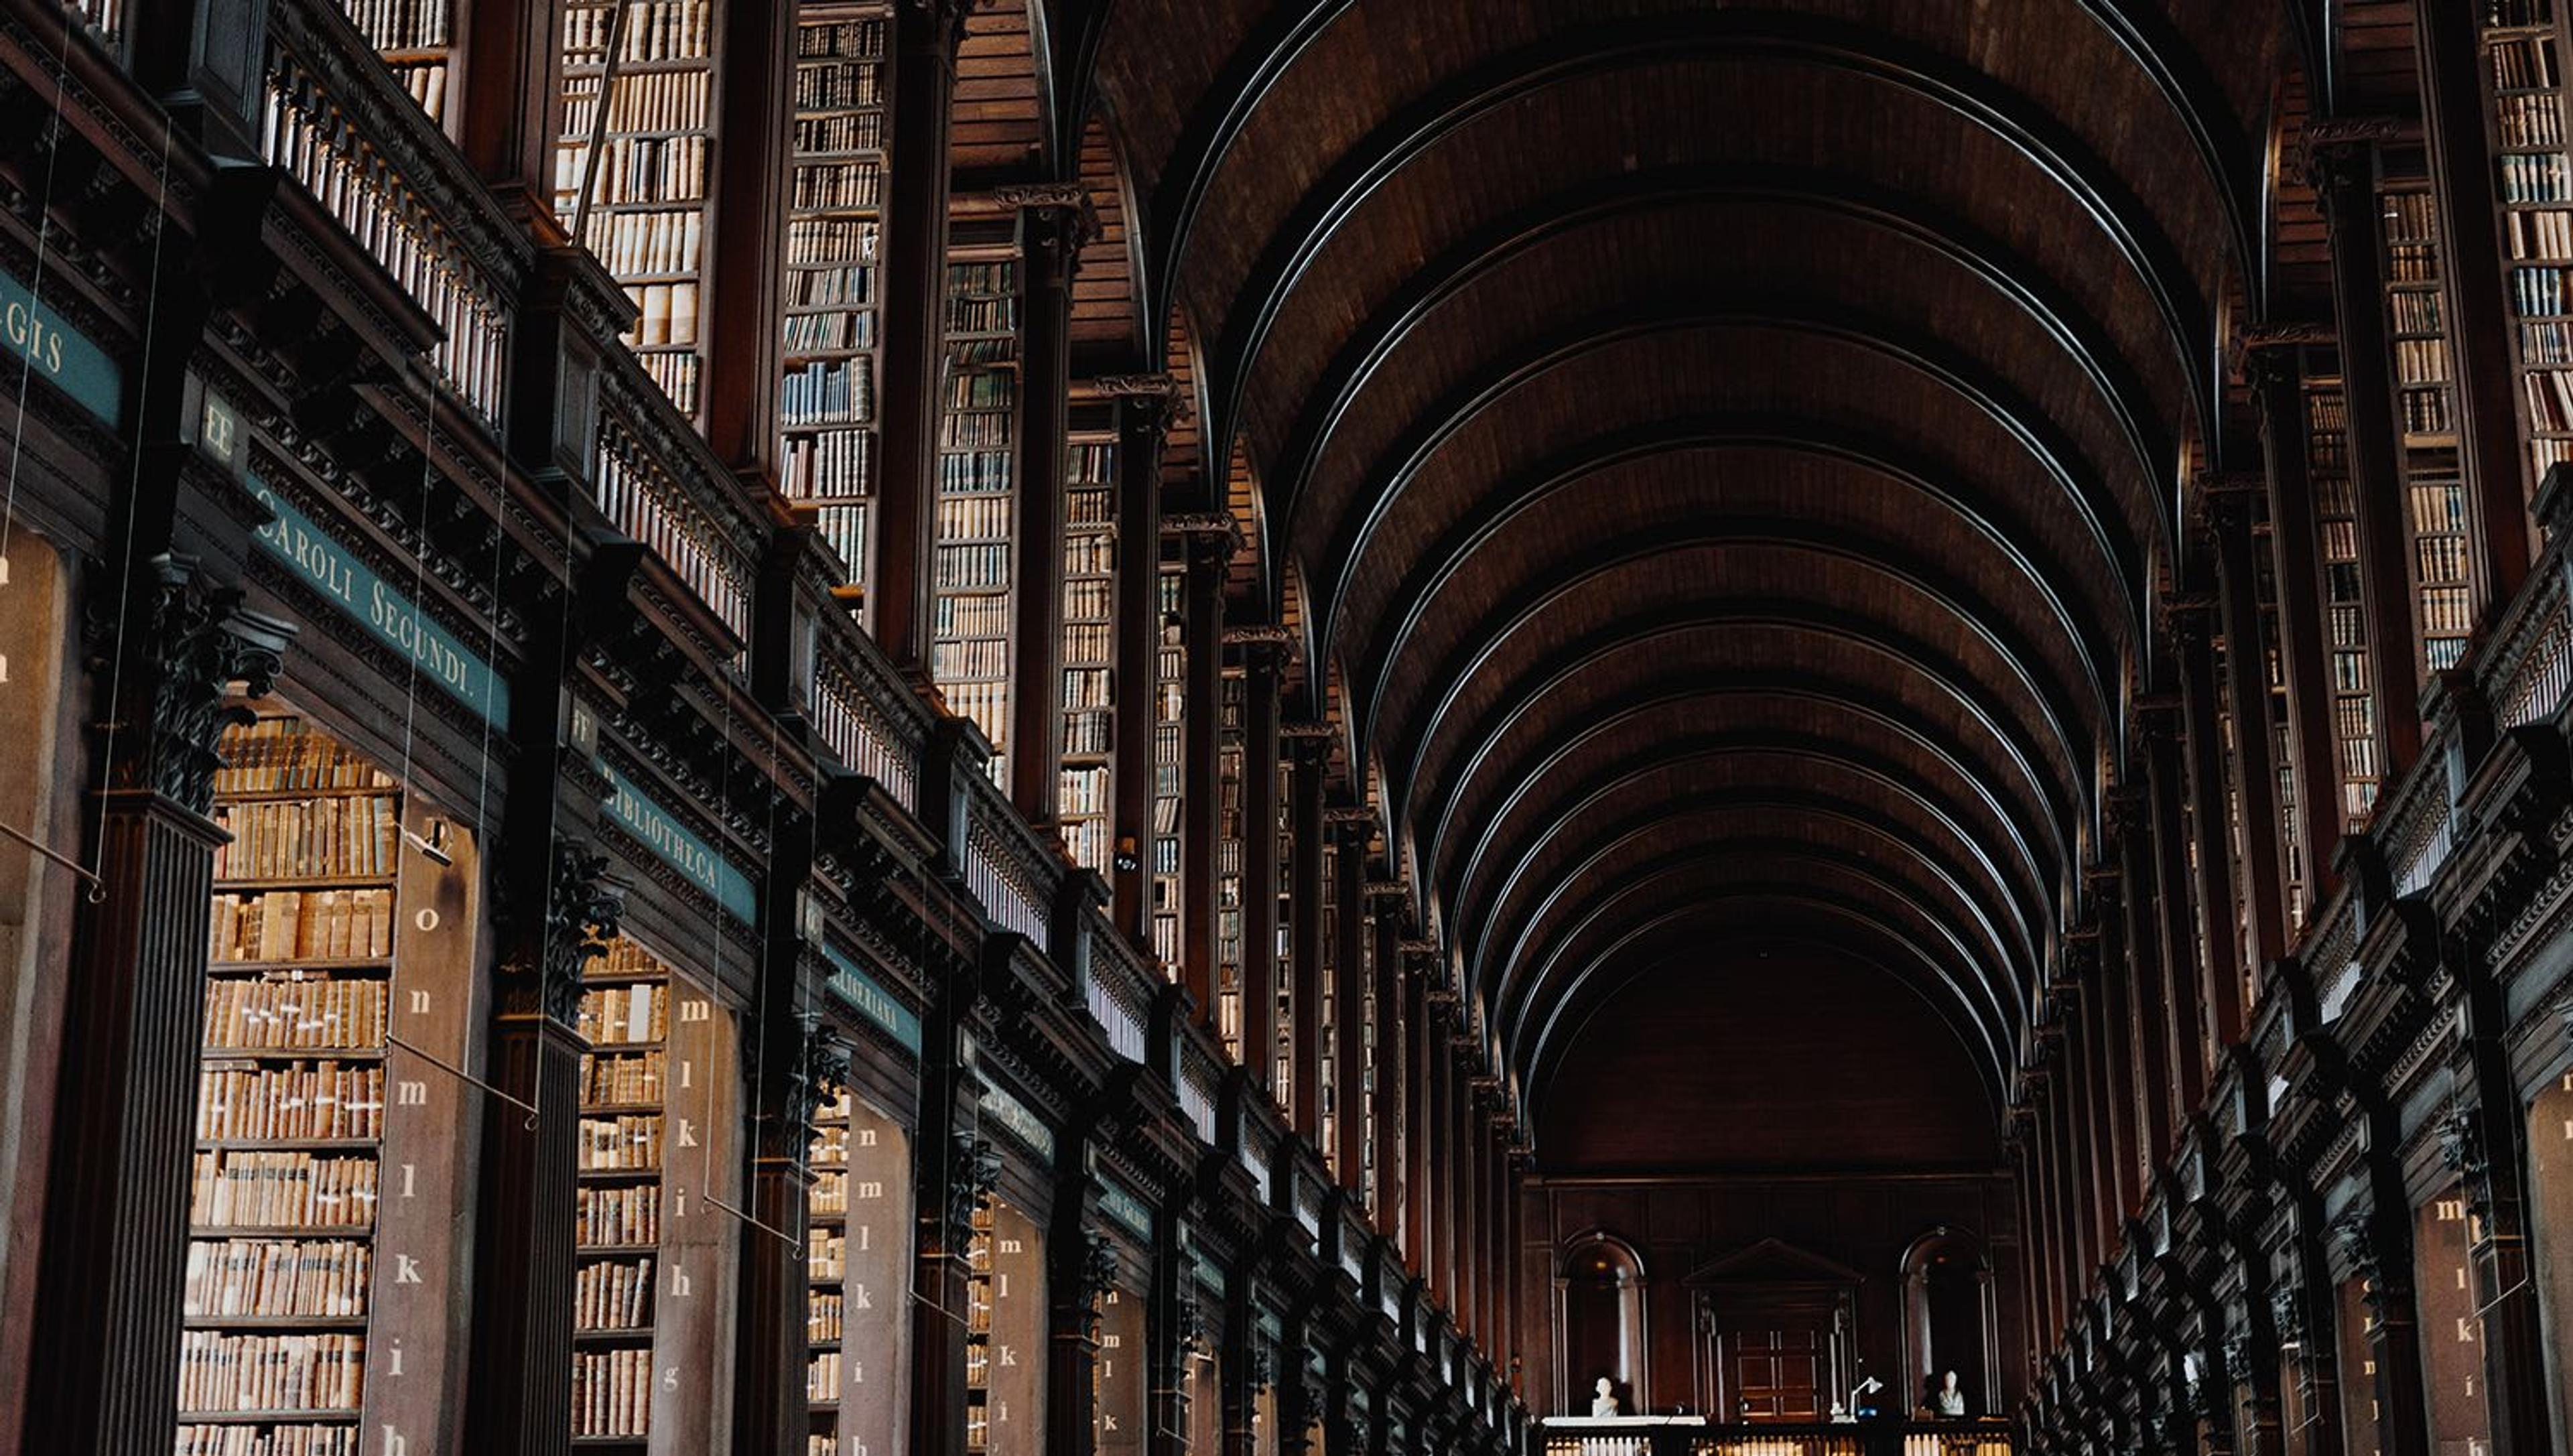 The Book of Kells of Trinity College